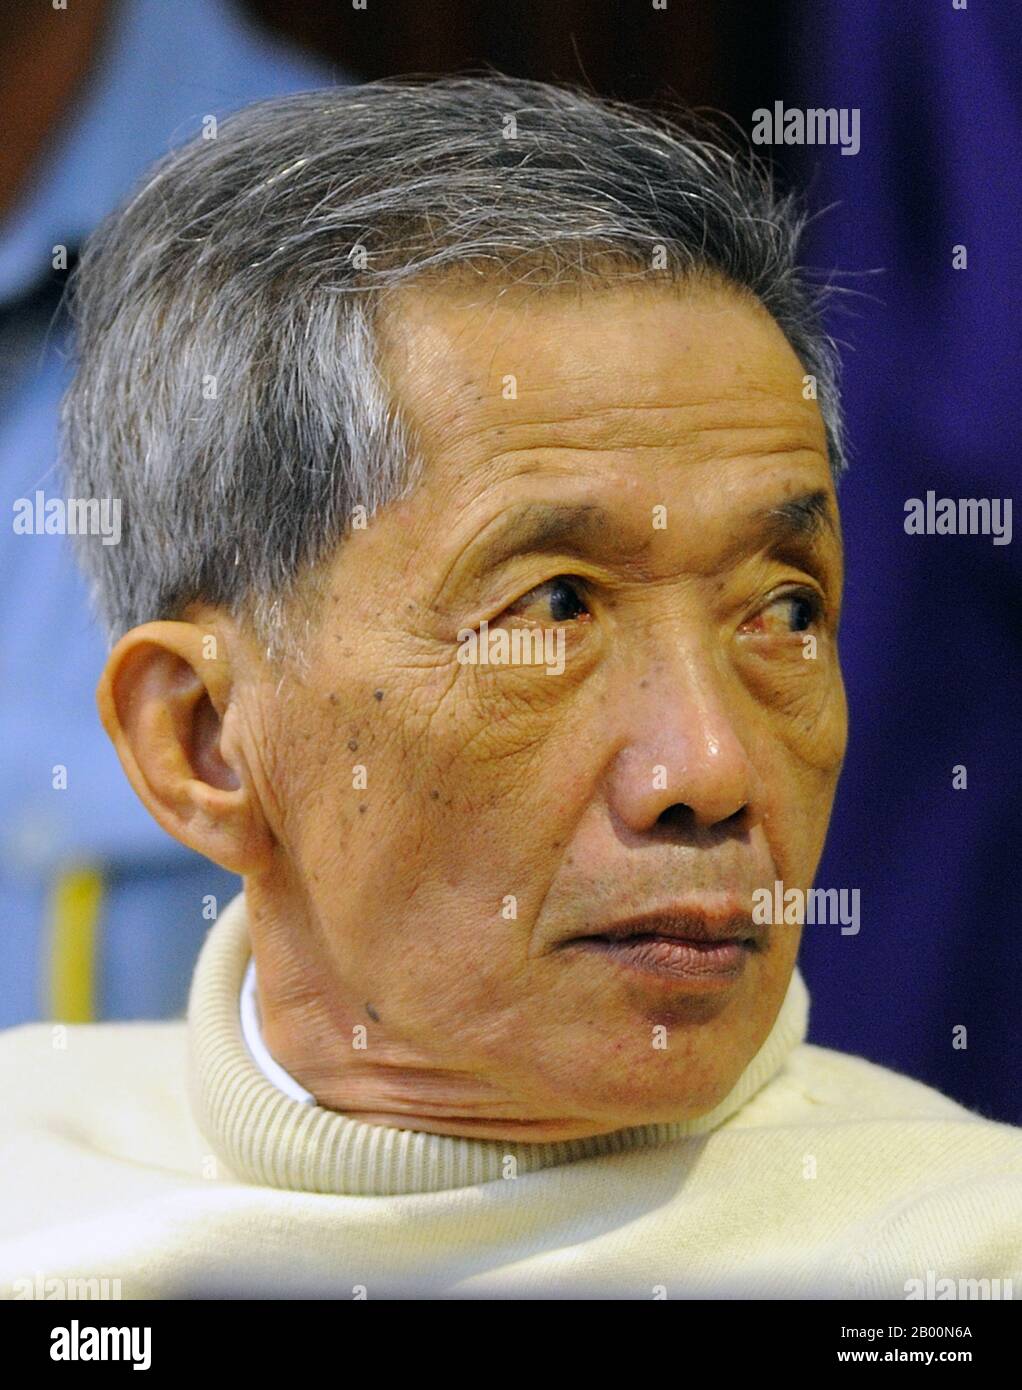 Cambodia: Kang Kek Iew, aka Comrade Duch, former Khmer Rouge Commandant at Tuol Sleng S21 Prison and Santebal chief, 26 November 2009. Photo by ECCC Pool/Mark Peters (CC BY 2.0 License).  Photo taken by Mark Peters during trial of suspect at The Extraordinary Chambers in the Courts of Cambodia for the Prosecution of Crimes Committed During the Period of Democratic Kampuchea, commonly known as Cambodia Tribunal. Stock Photo